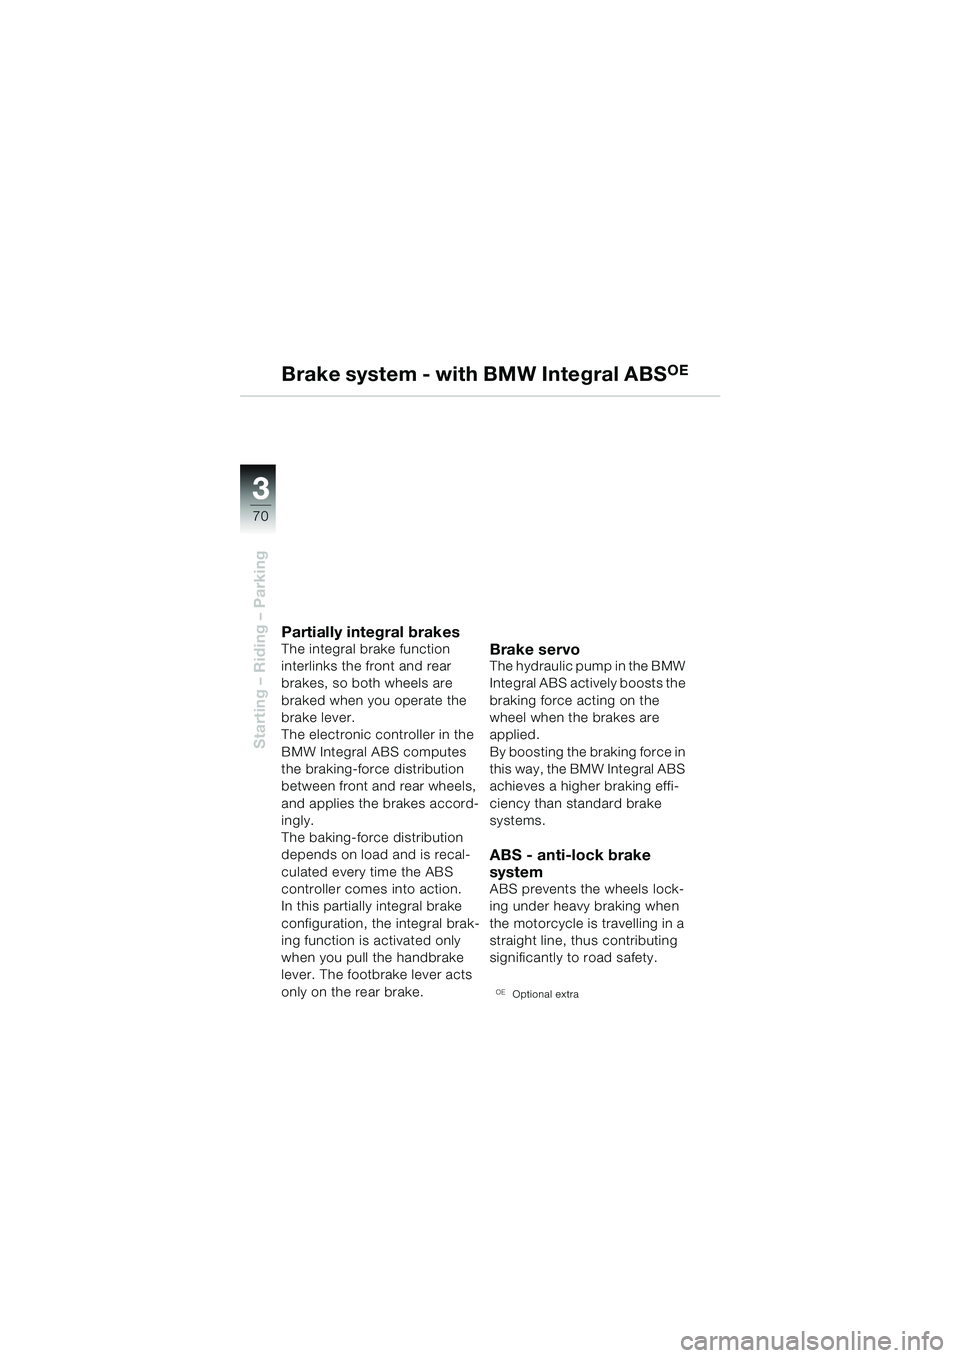 BMW MOTORRAD R 850 R 2004  Riders Manual (in English) 33
70
Starting – Riding – Parking
Brake system - with BMW Integral ABSOE
Partially integral brakesThe integral brake function 
interlinks the front and rear 
brakes, so both wheels are 
braked whe